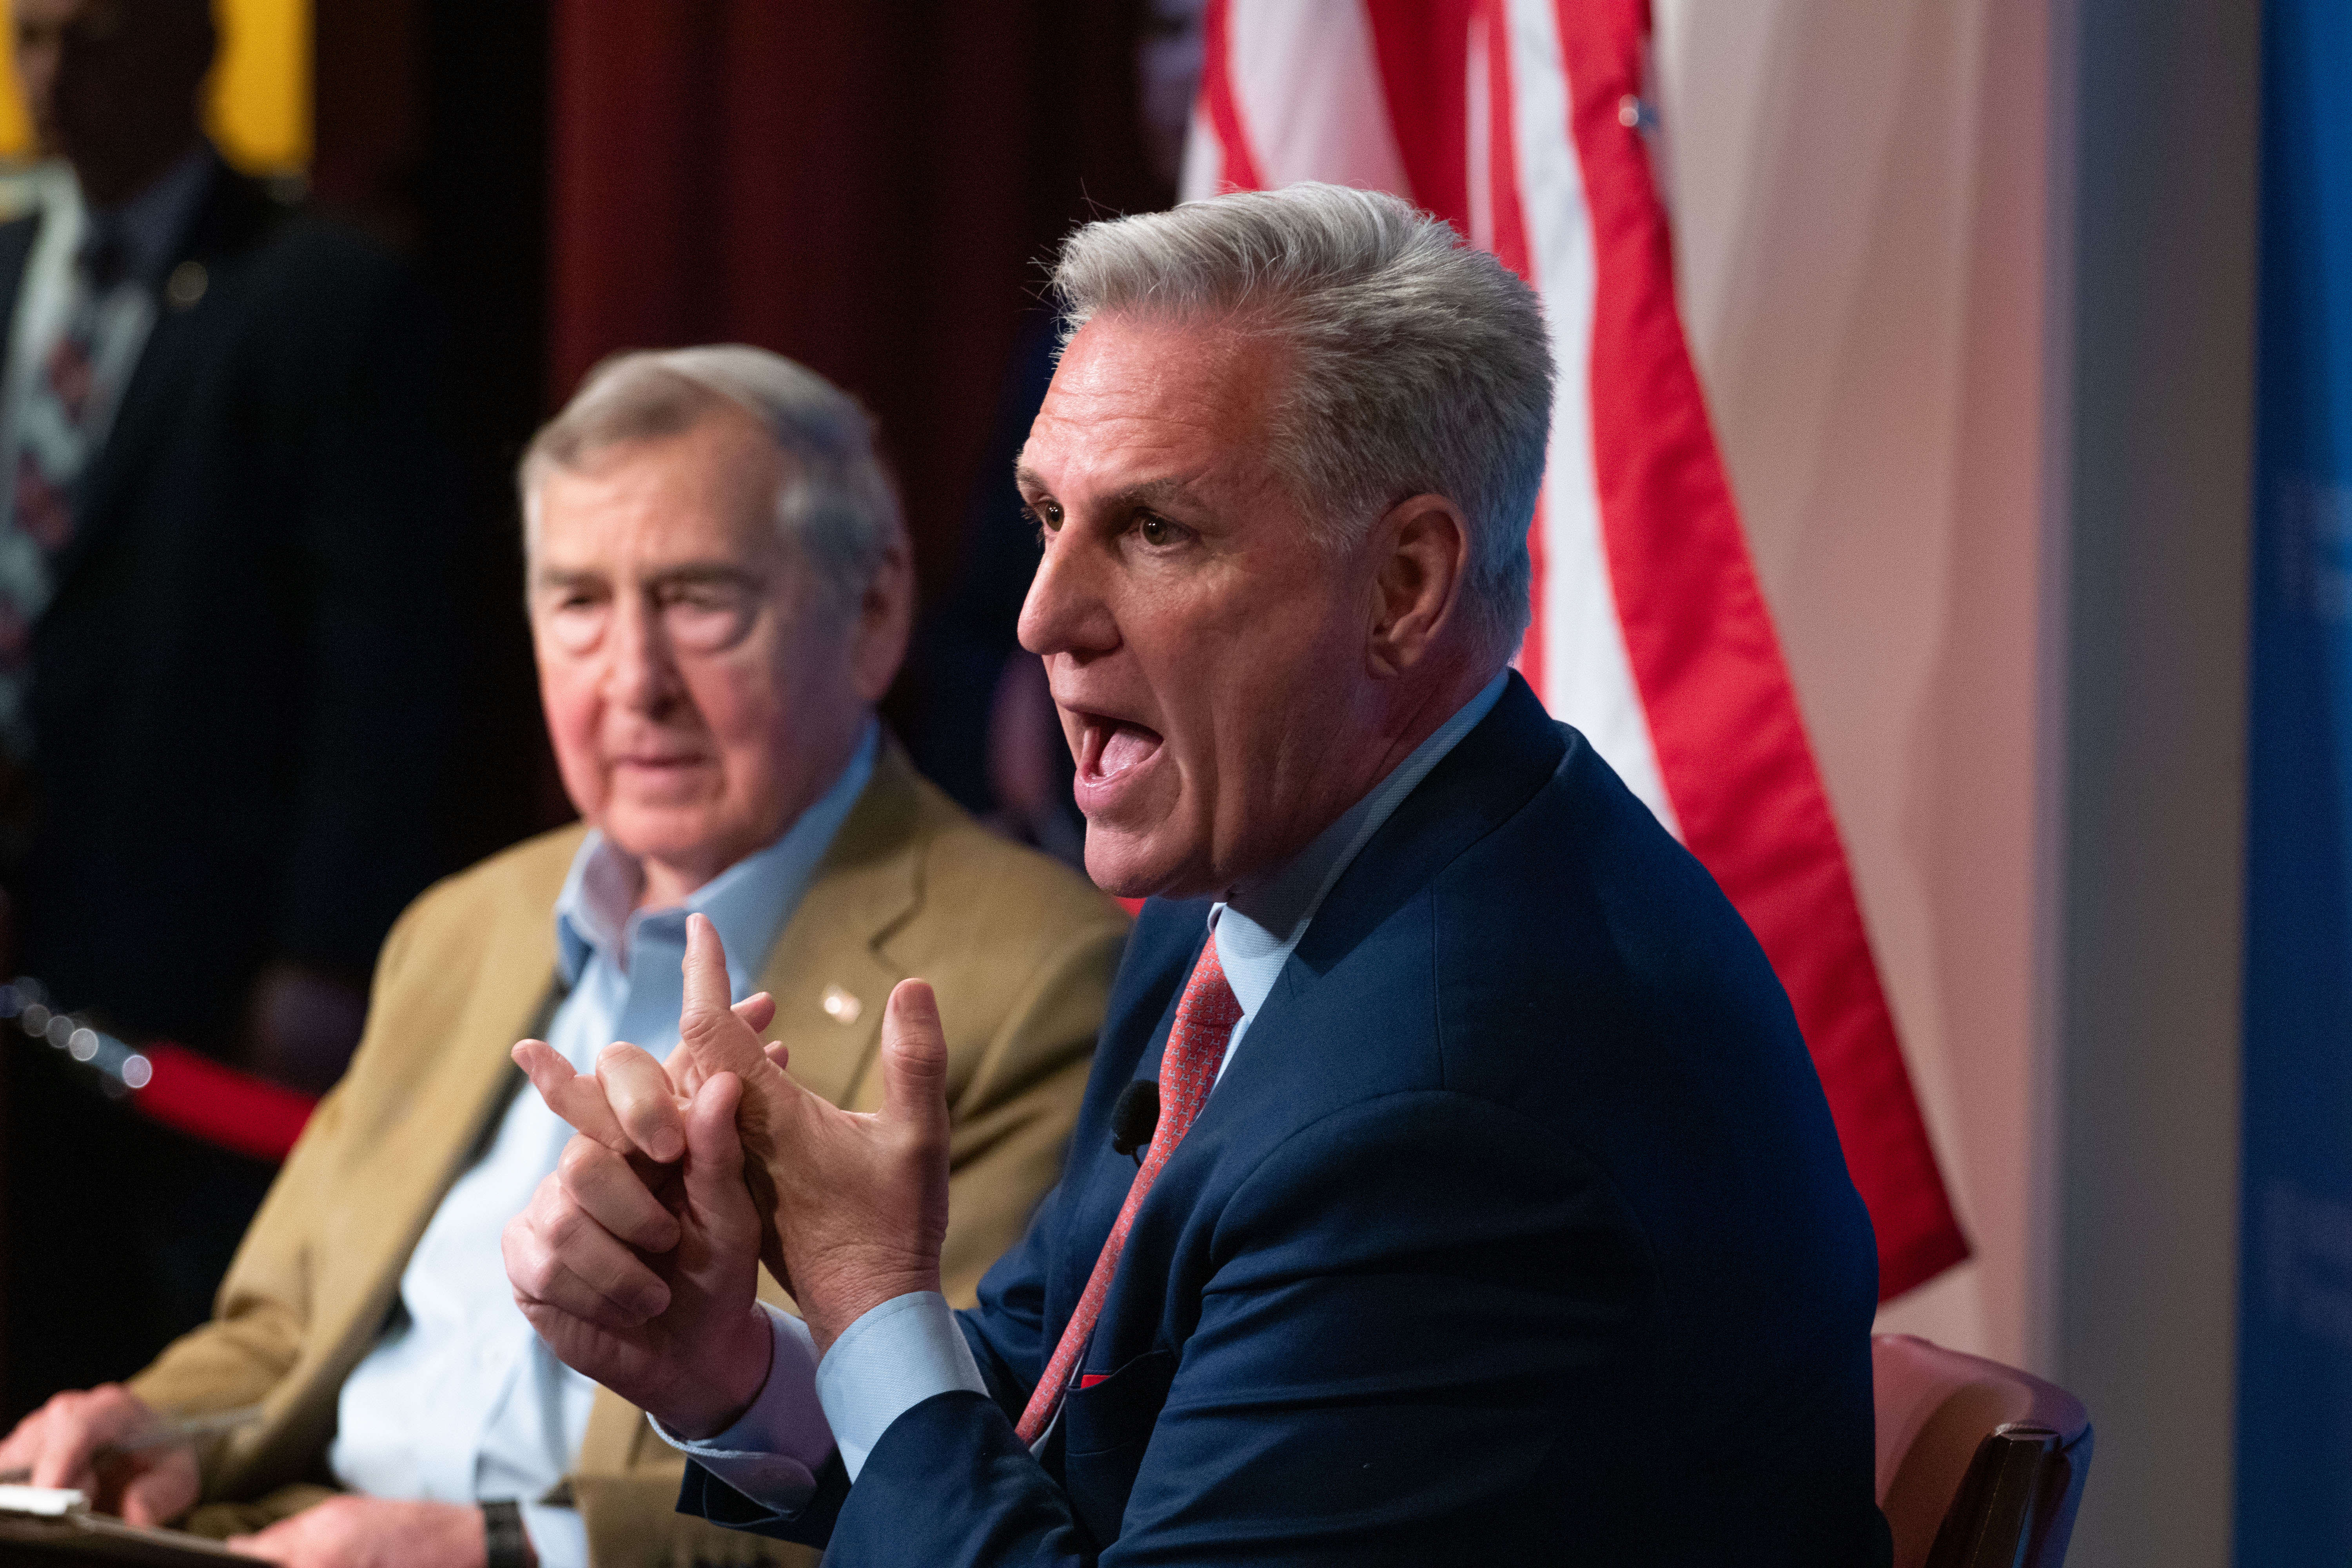 The Harvard Kennedy School Institute of Politics hosted a conversation with Kevin McCarthy, Former Speaker of the House of Representatives, on the 2024 election.